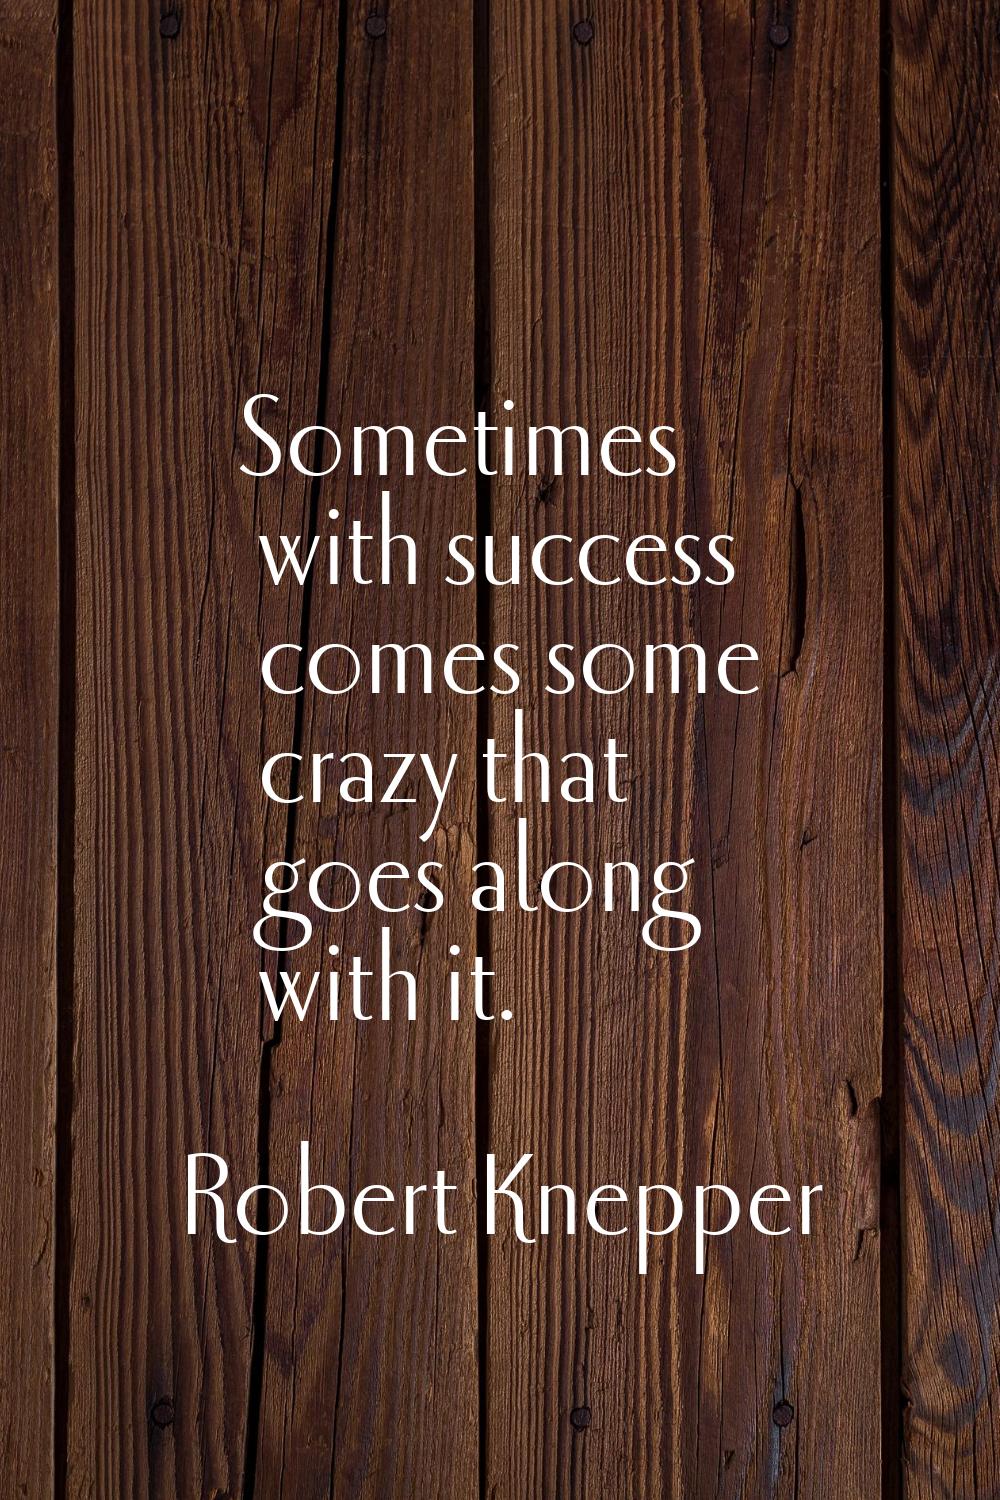 Sometimes with success comes some crazy that goes along with it.